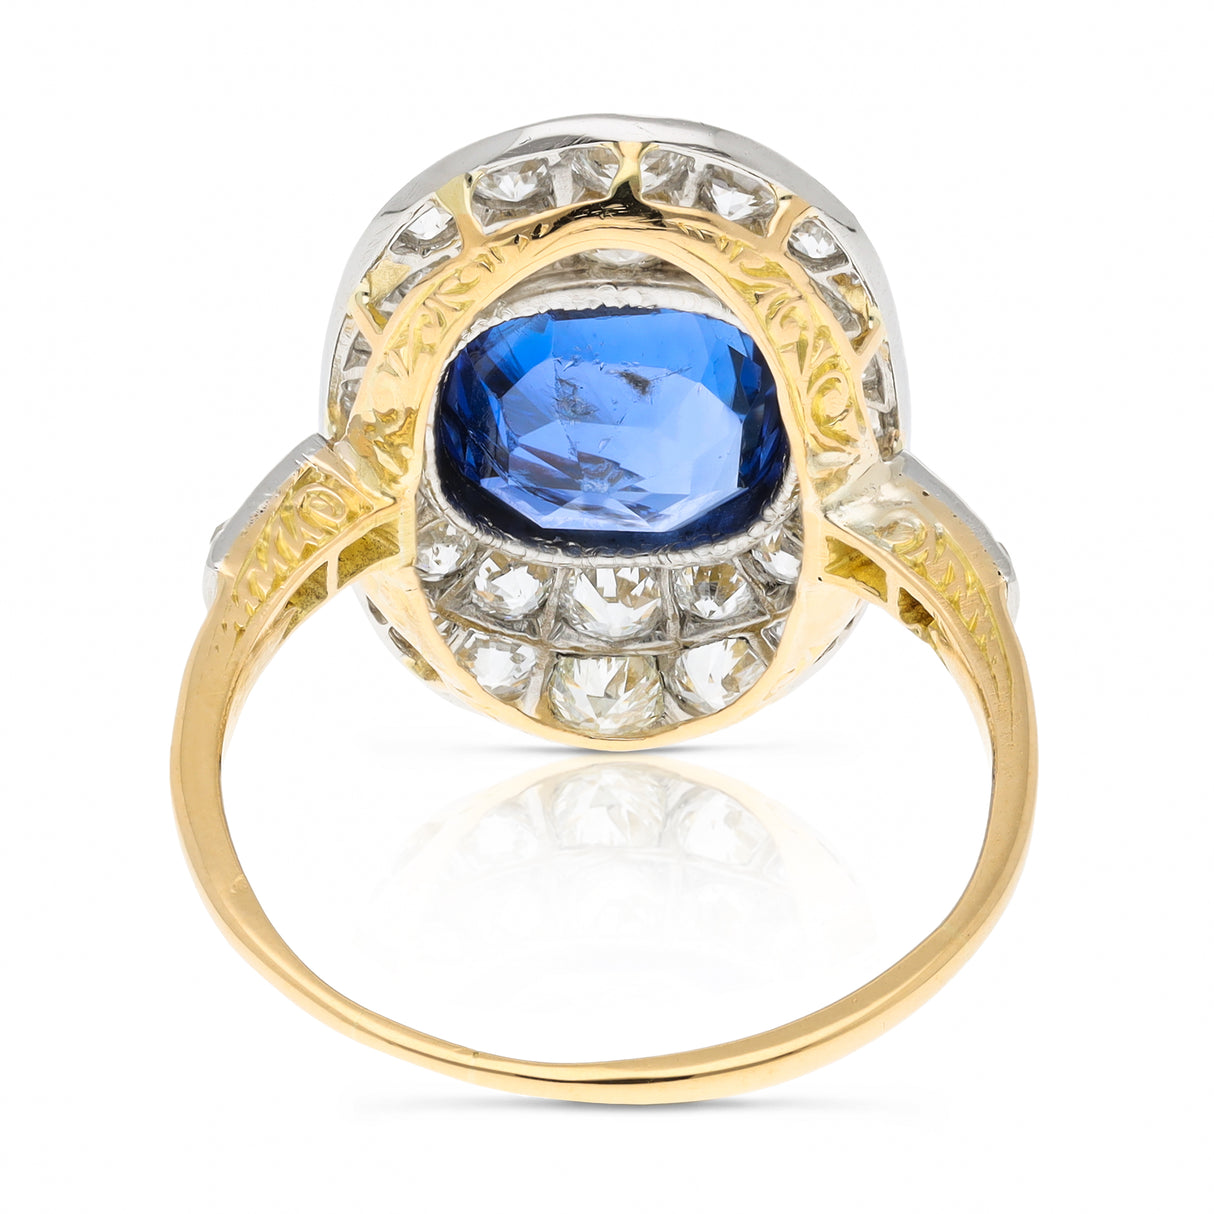 Edwardian sapphire and diamond ring, rear view. 